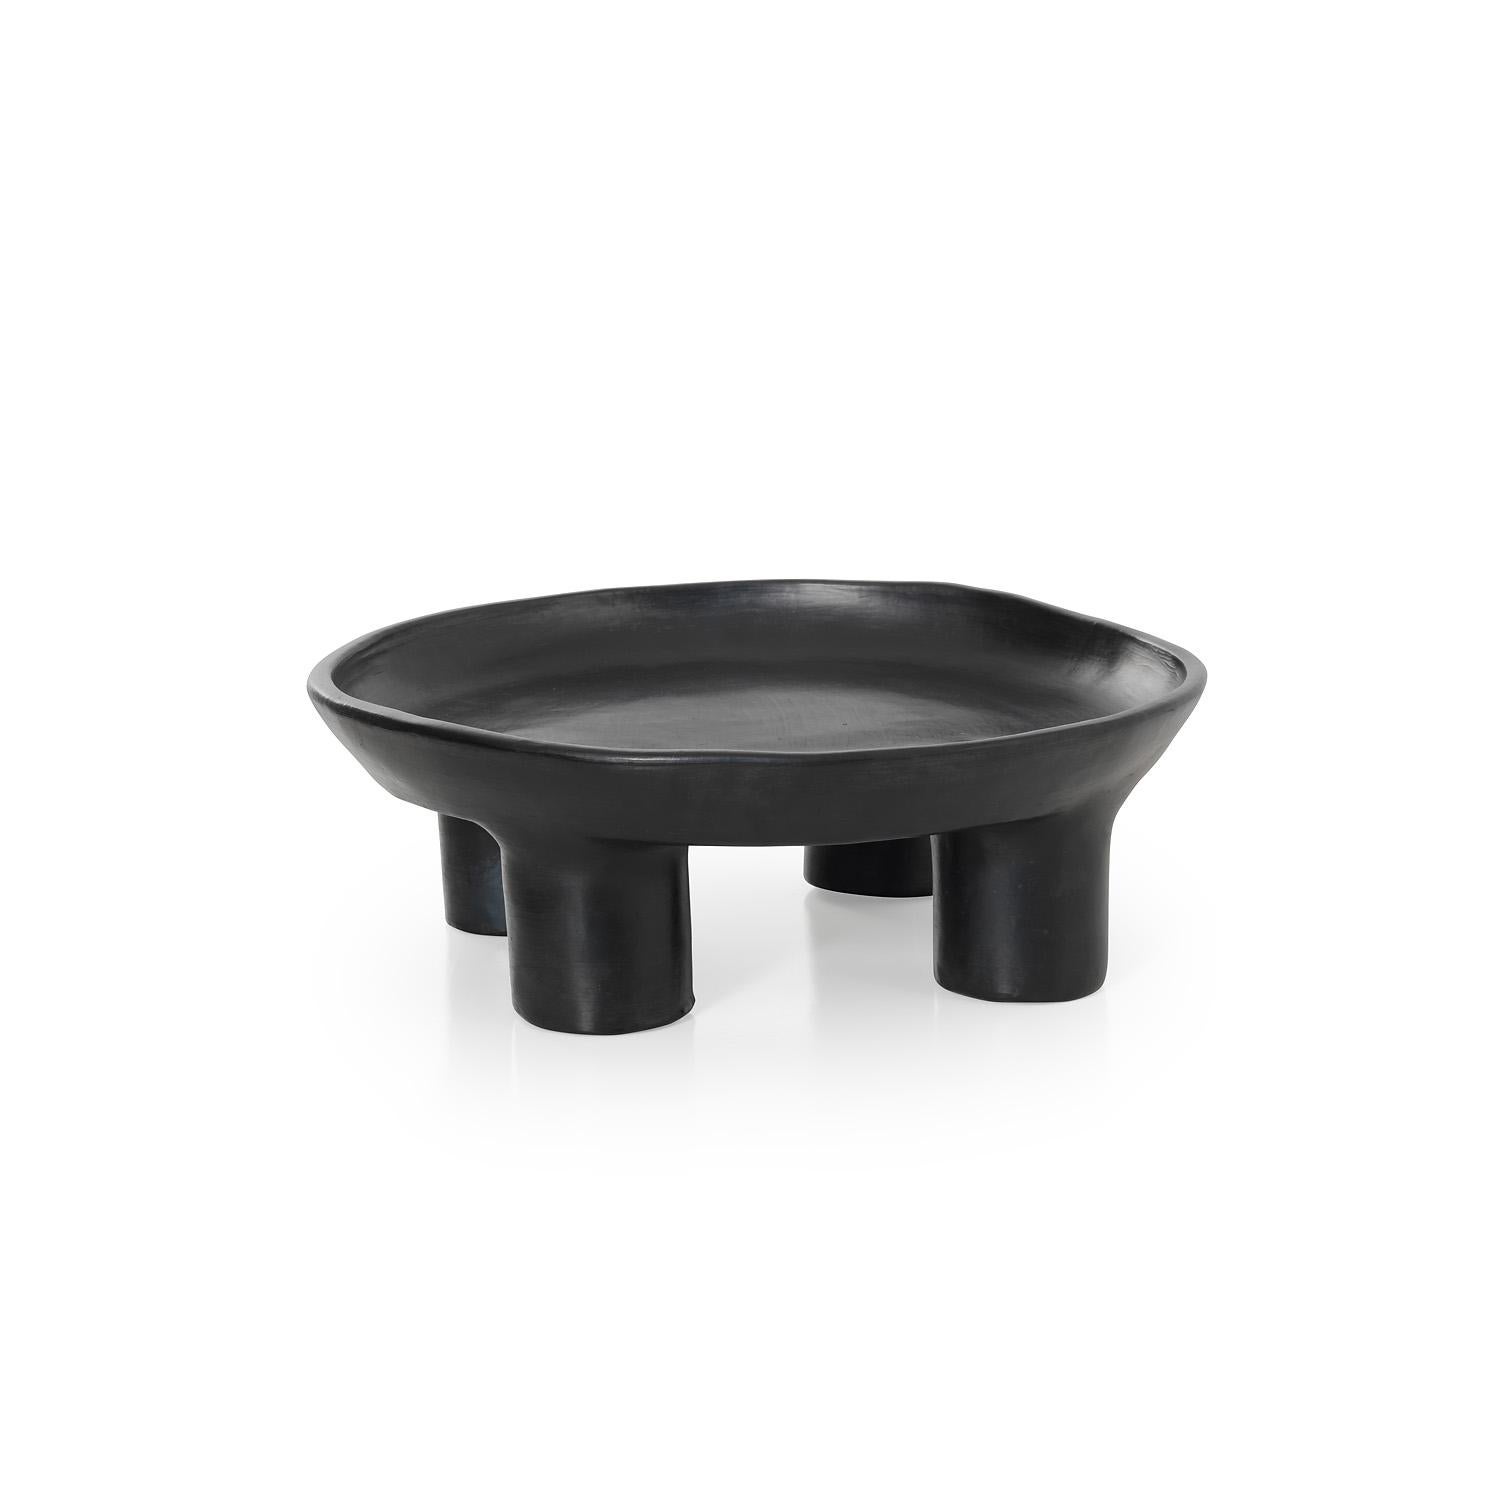 Large tray 1 by Sebastian Herkner
Materials: Heat-resistant black ceramic. 
Technique: Glazed. Oven cooked and polished with semi-precious stones. 
Dimensions: Diameter 44 cm x height 15 cm 
Available in sizes mini and small.

This pot belongs